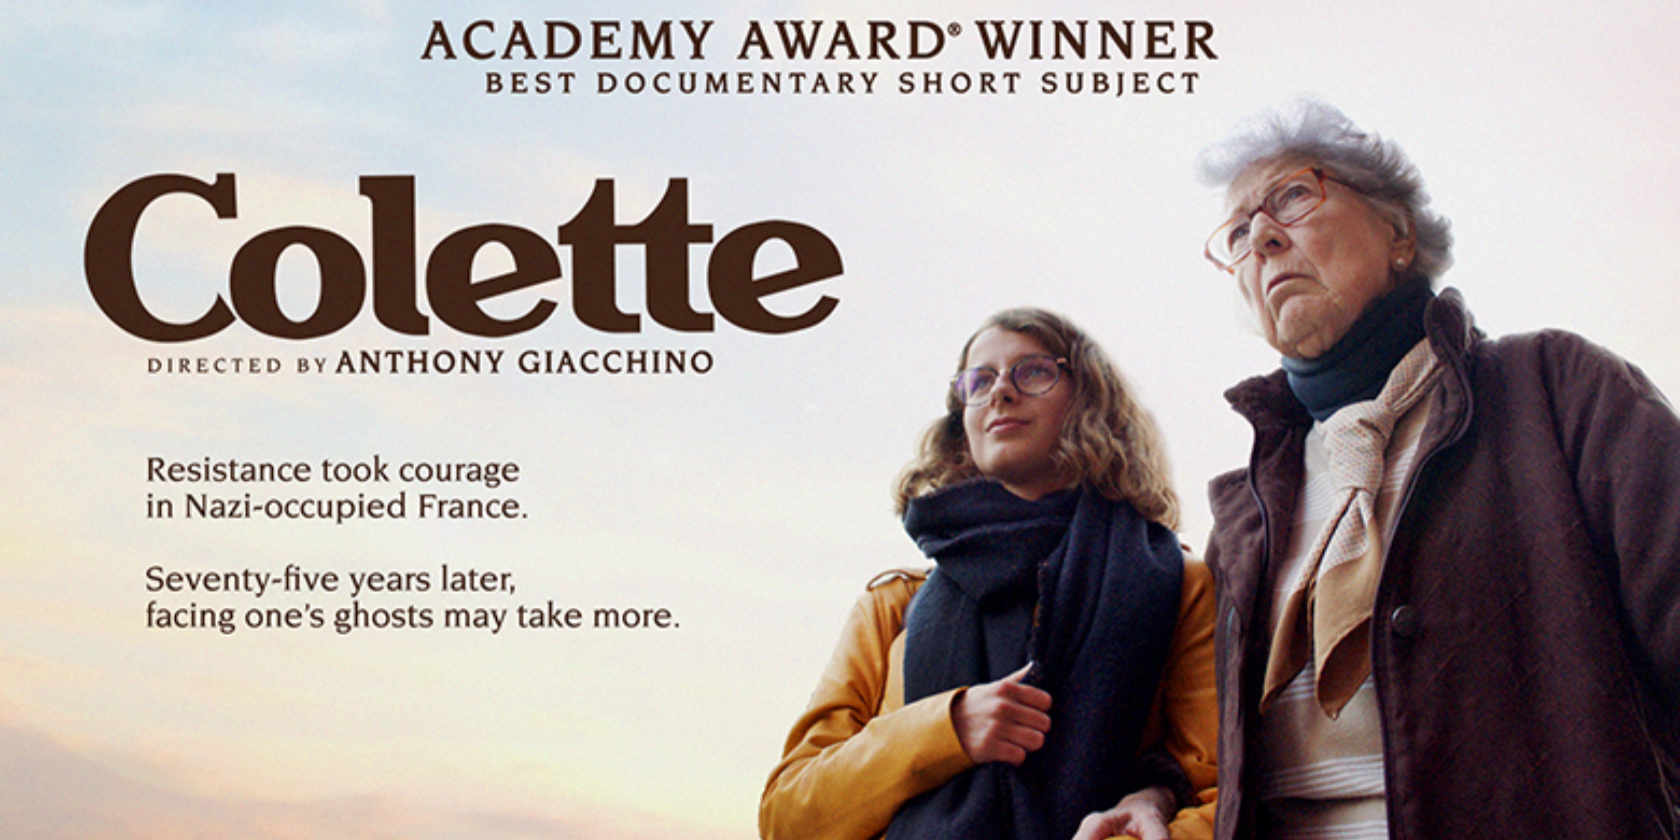 The movie poster for Colette